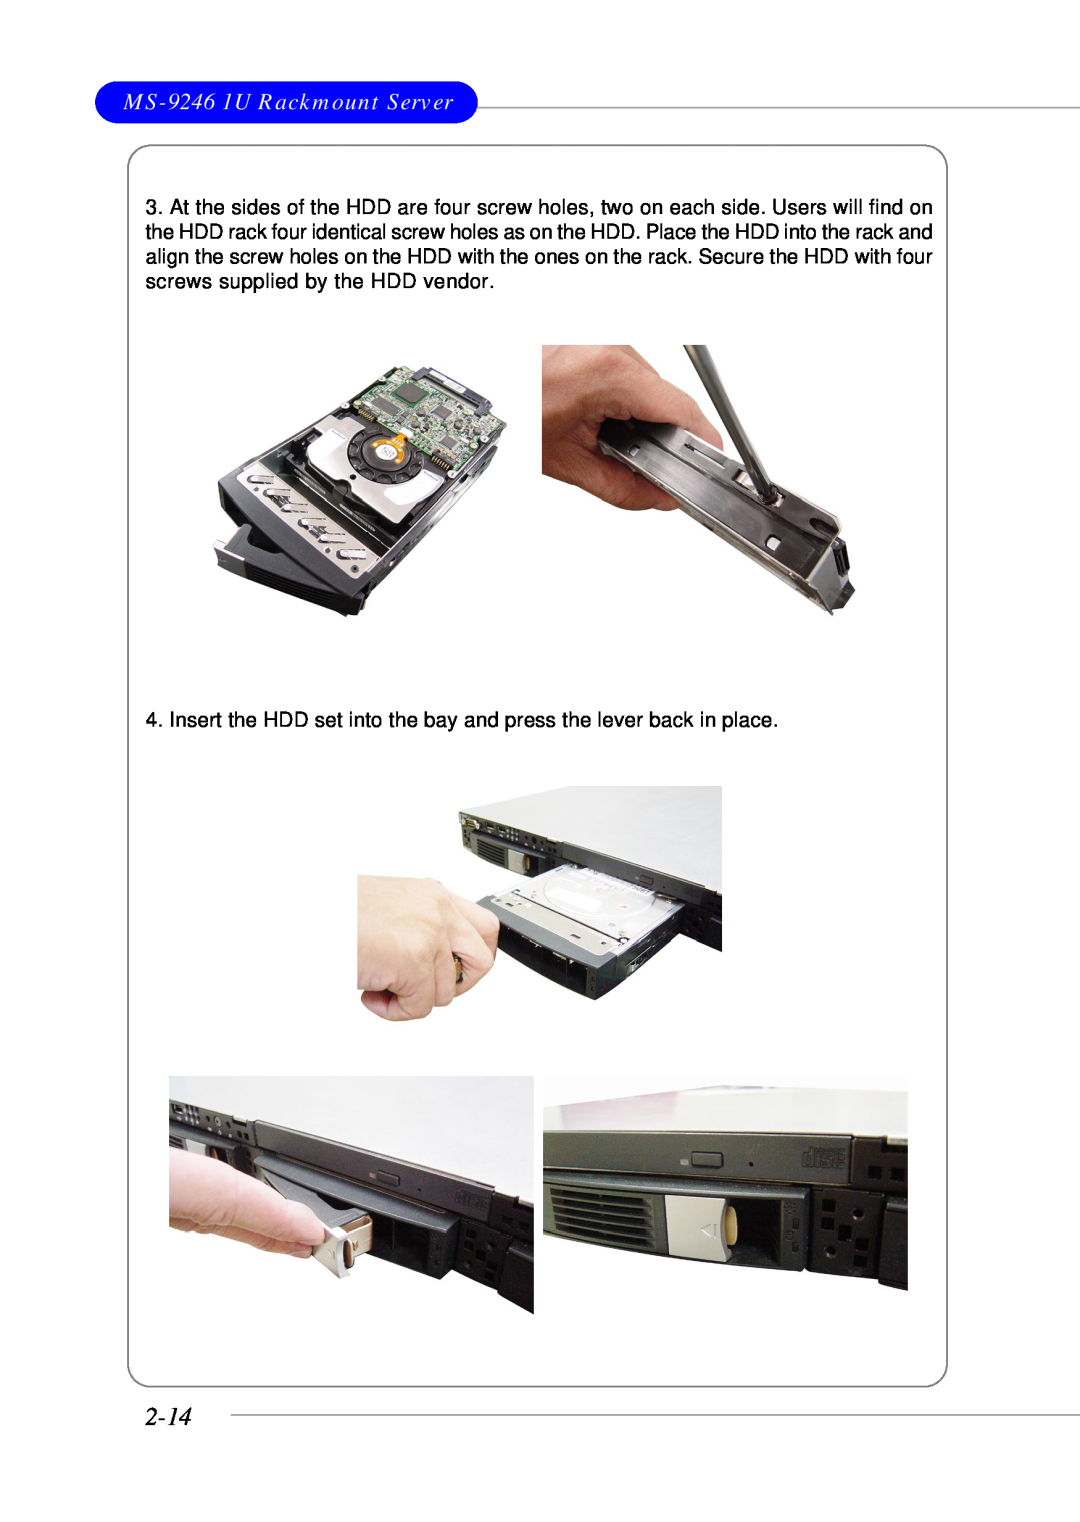 MSI manual 2-14, MS-9246 1U Rackmount Server, Insert the HDD set into the bay and press the lever back in place 